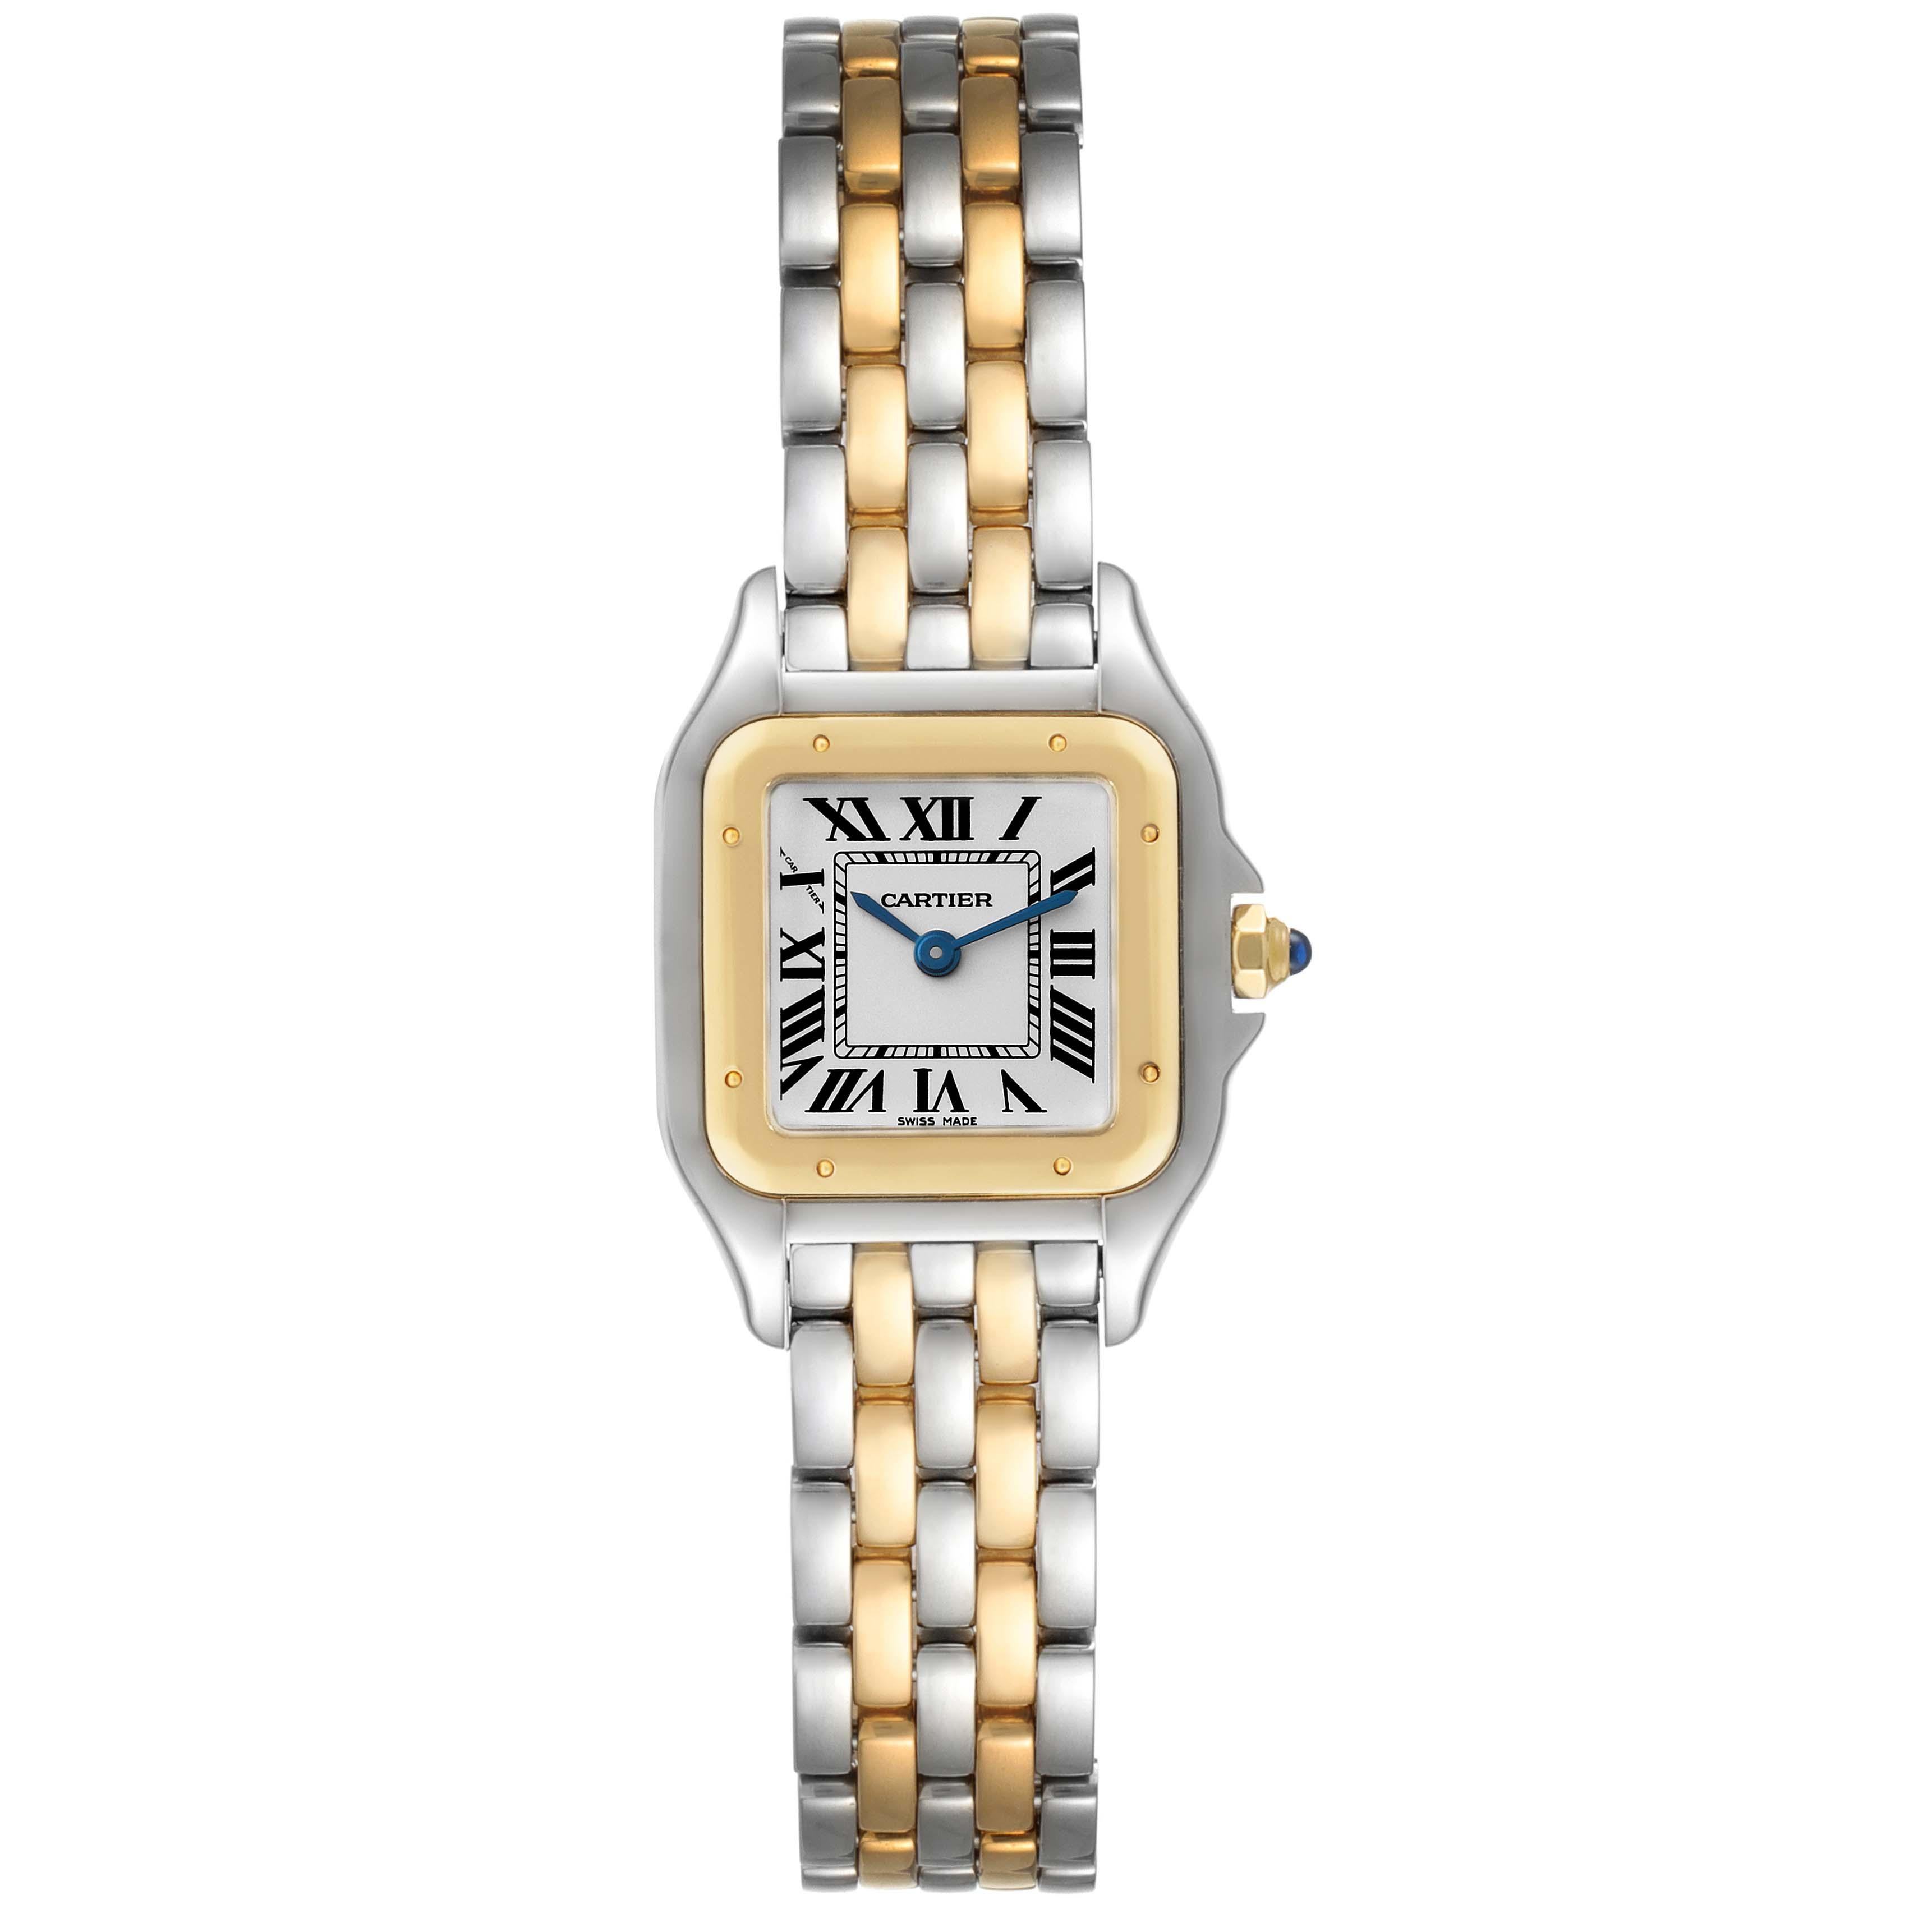 Cartier Panthere Steel Yellow Gold 2 Row Ladies Watch W2PN0006 Box Papers. Quartz movement. Stainless steel case 22.0 x 22.0 mm. 18k yellow gold octagonal crown set with blue spinel cabochon. 18K yellow gold bezel, secured with 8 stainless steel